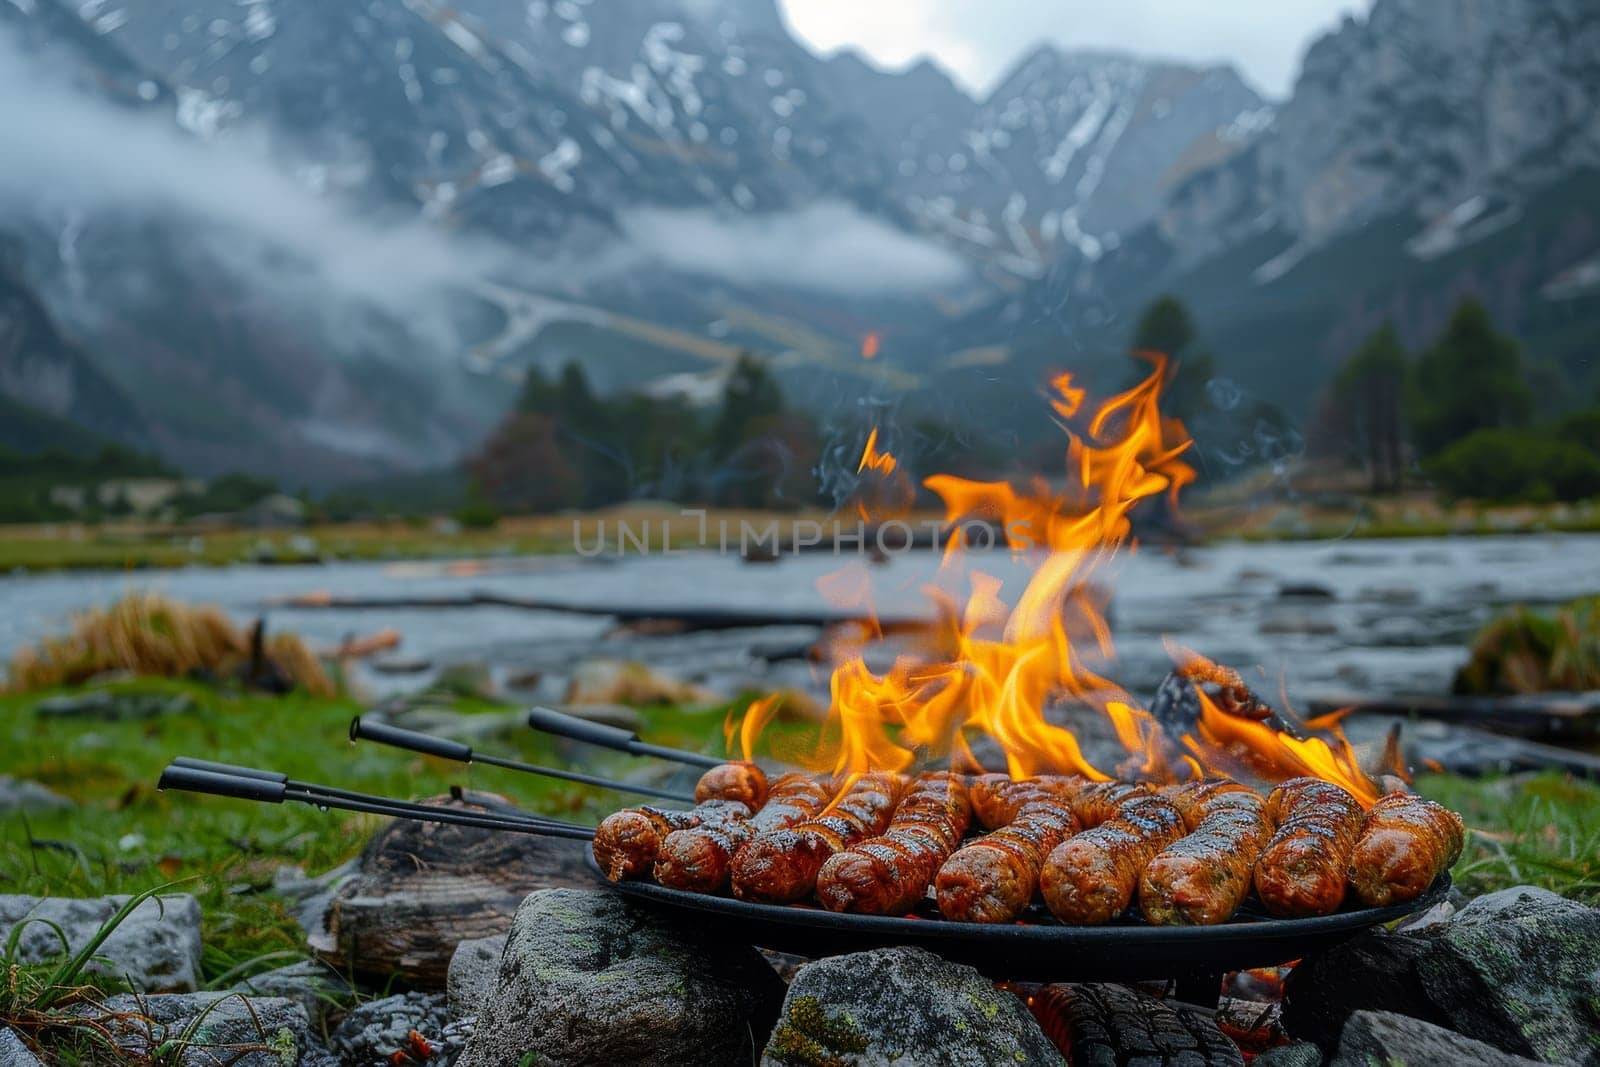 A plate of hot dogs is being cooked over a fire in a grassy field by itchaznong